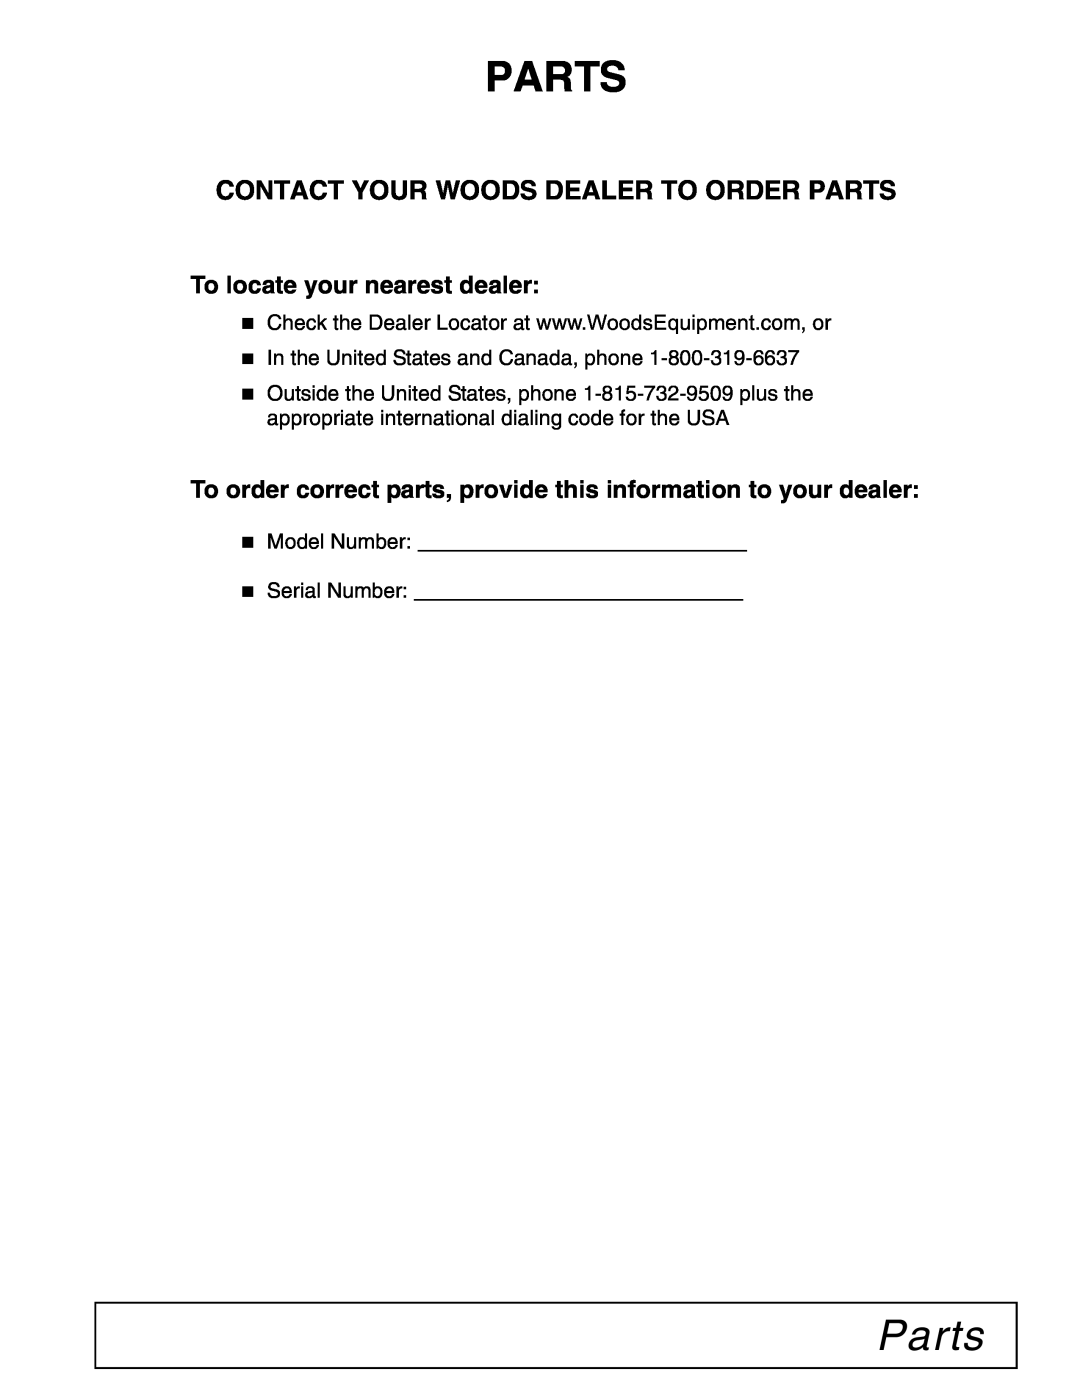 Woods Equipment 7000, 7192, 7194, 7195, 7200, 7205 manual Contact Your Woods Dealer To Order Parts 